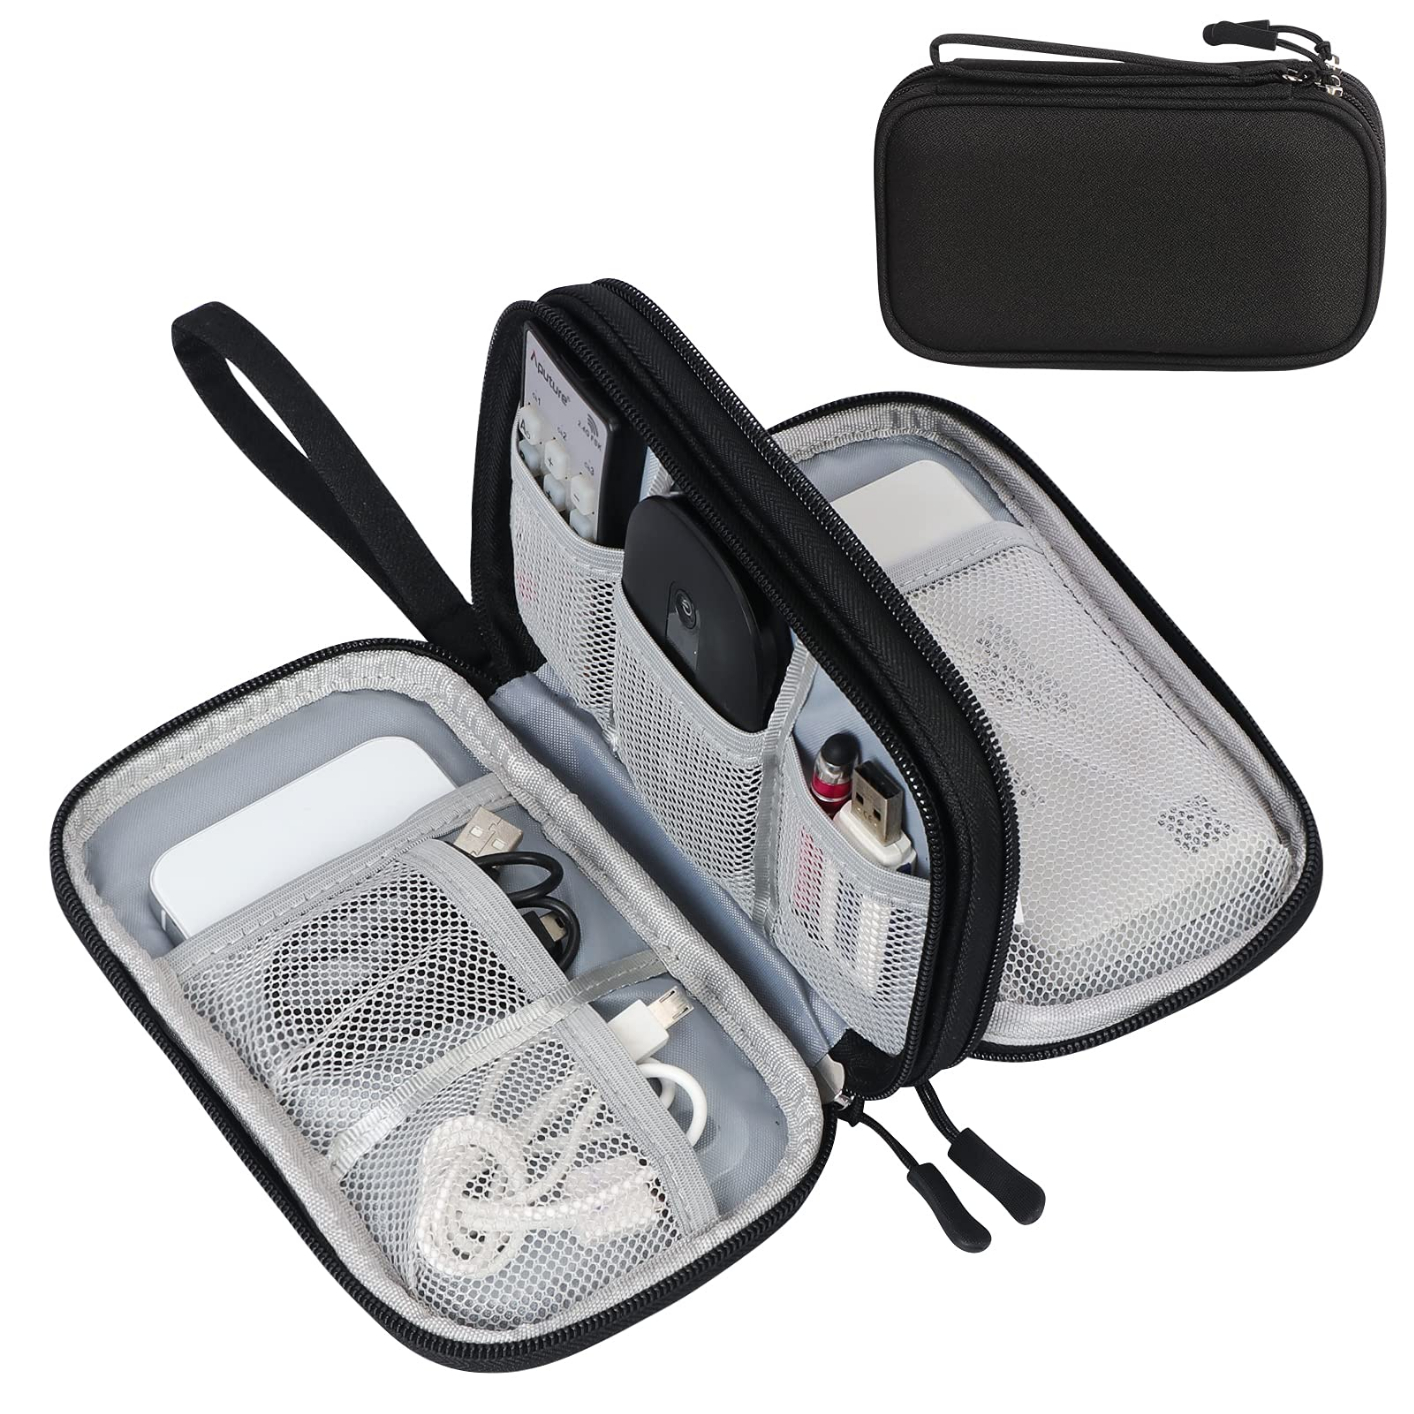 SM05 Electronic Organizer, Travel Cable Organizer Bag Pouch Electronic Accessories Carry Case Portable Waterproof Double Layers All-in-One Storage Bag for Cable, Cord, Charger, Phone, Earphone